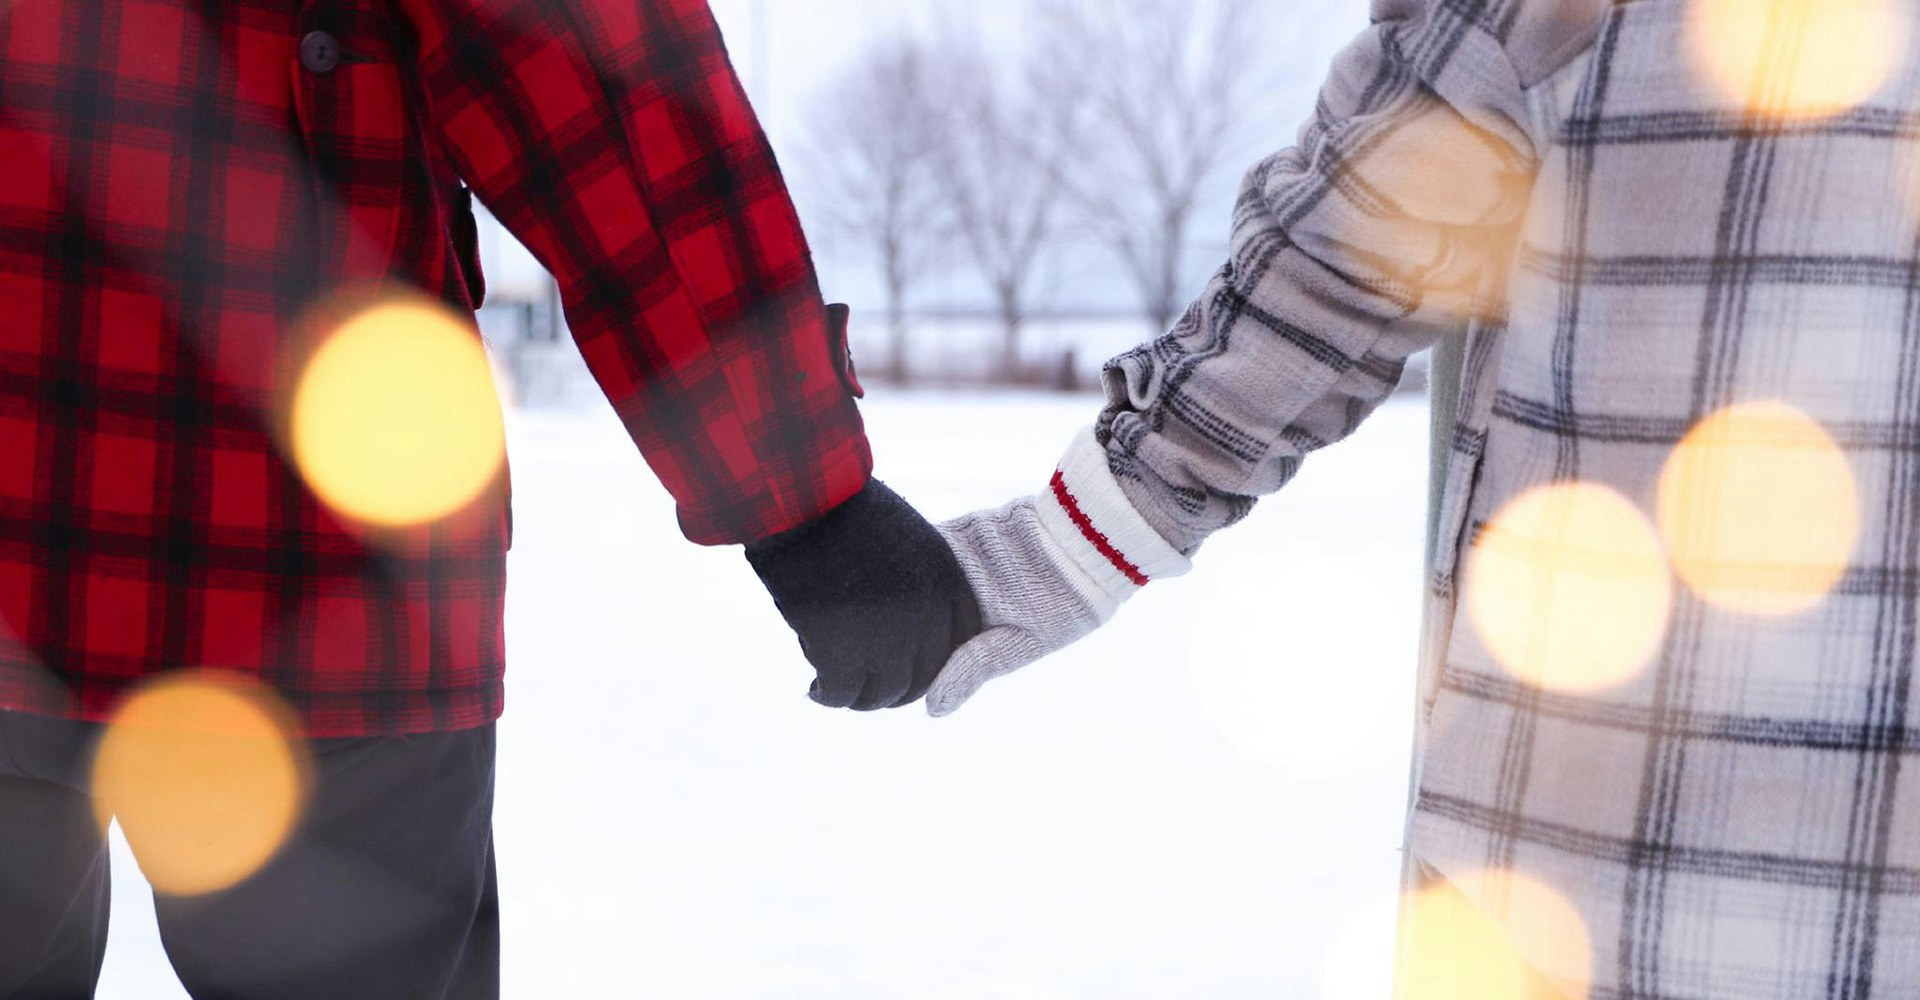 Holding Hands in Winter